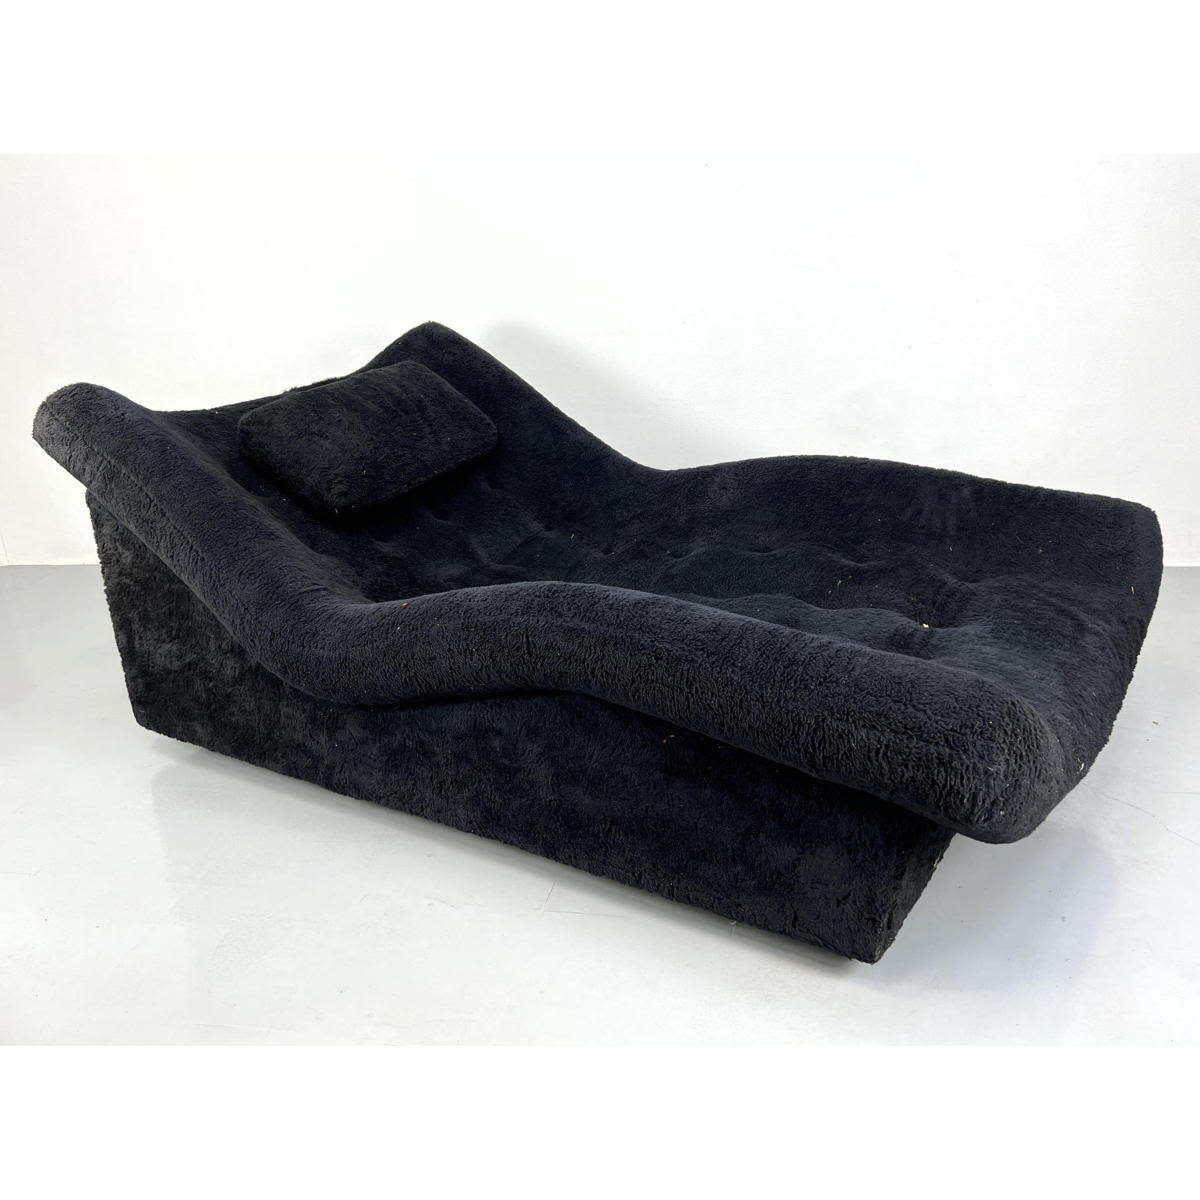 Oversized Modernist Wave Chaise 2ff14a